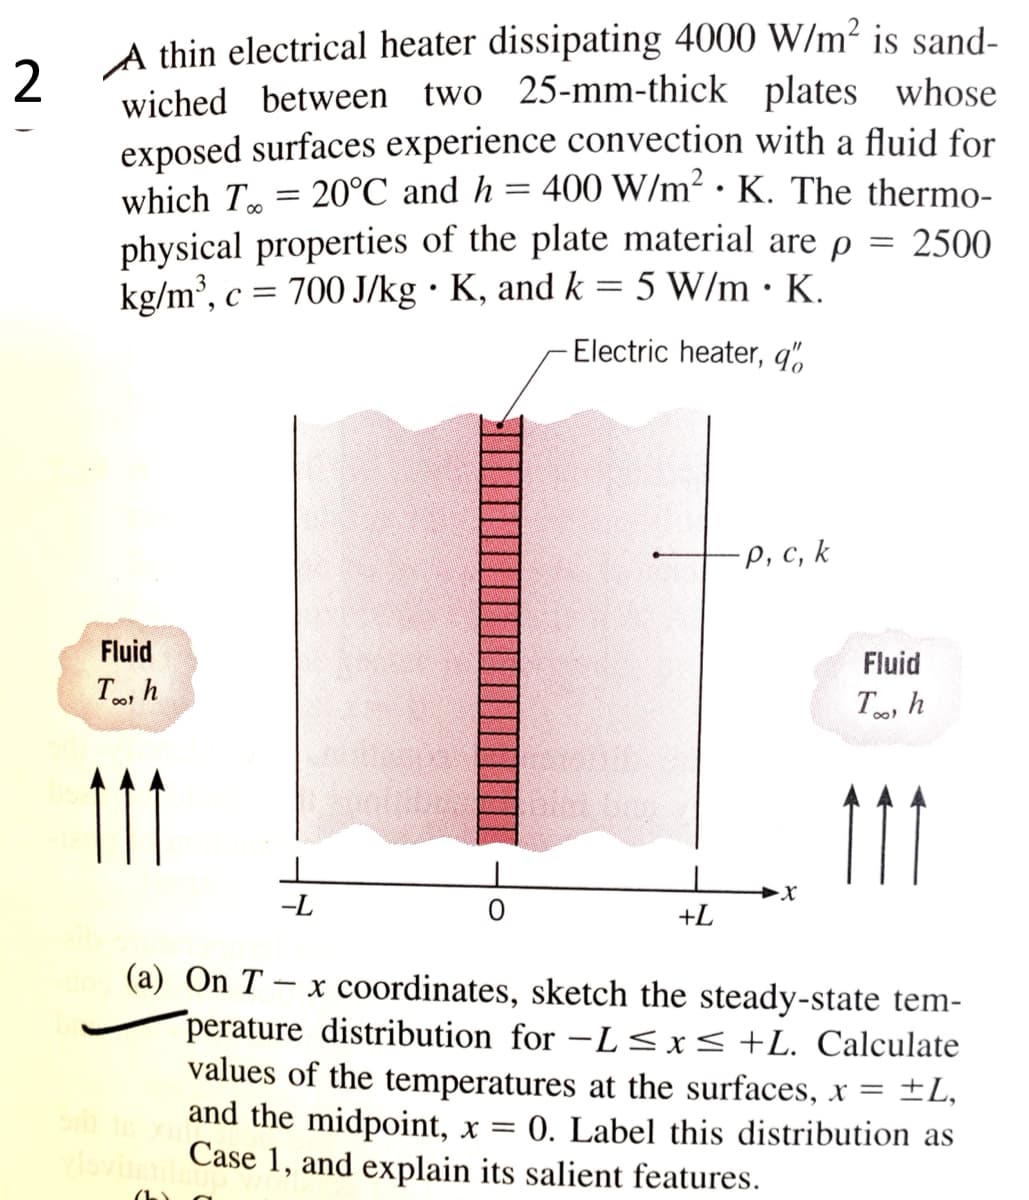 2
whose
A thin electrical heater dissipating 4000 W/m² is sand-
wiched between two 25-mm-thick plates
exposed surfaces experience convection with a fluid for
20°C and h = 400 W/m² · K. The thermo-
which T..
physical properties of the plate material are p = 2500
700 J/kg K, and k = 5 W/mK.
.
Electric heater, q
kg/m³, c
Fluid
Too, h
=
=
-L
0
+L
- p, c, k
Fluid
To'
h
111
(a) On T-x coordinates, sketch the steady-state tem-
perature distribution for -L≤x≤ +L. Calculate
values of the temperatures at the surfaces, x = ±L,
and the midpoint, x = 0. Label this distribution as
Case 1, and explain its salient features.
(h) a